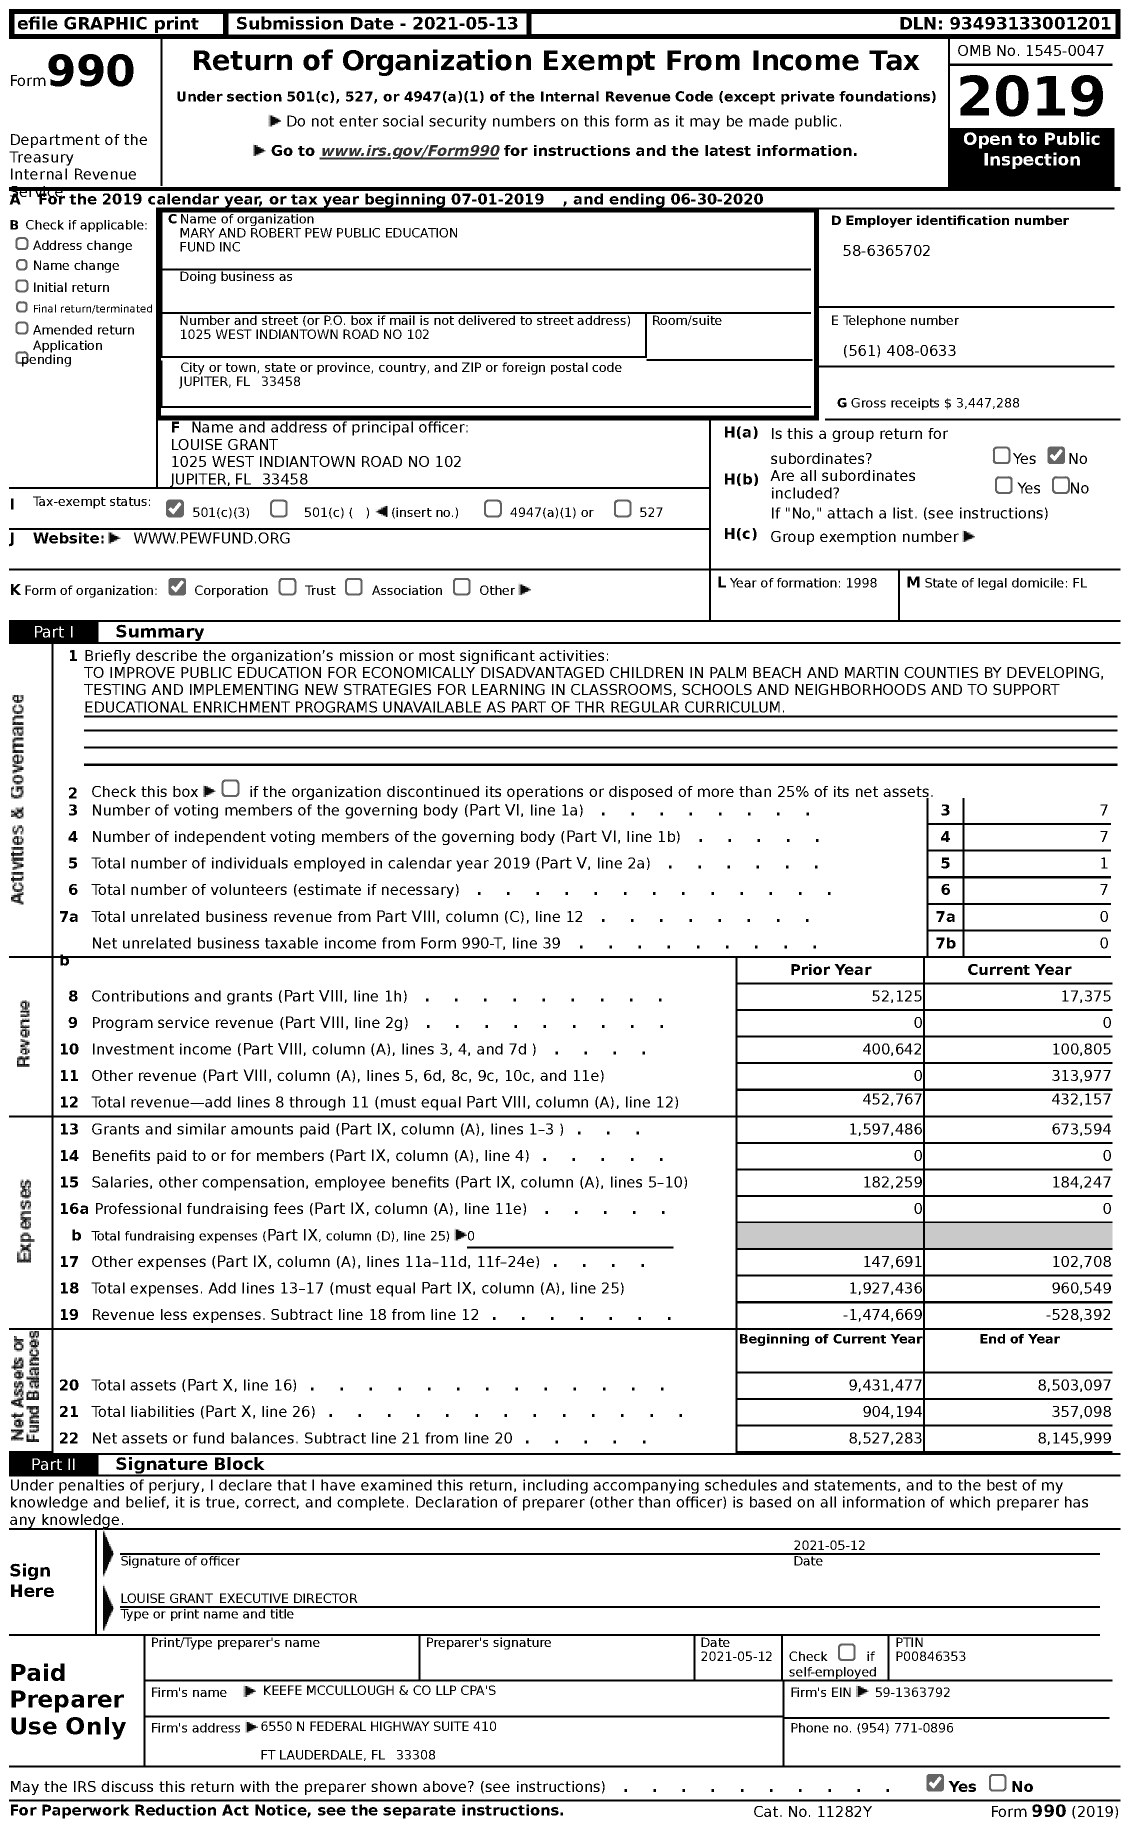 Image of first page of 2019 Form 990 for Mary and Robert Pew Public Education Fund